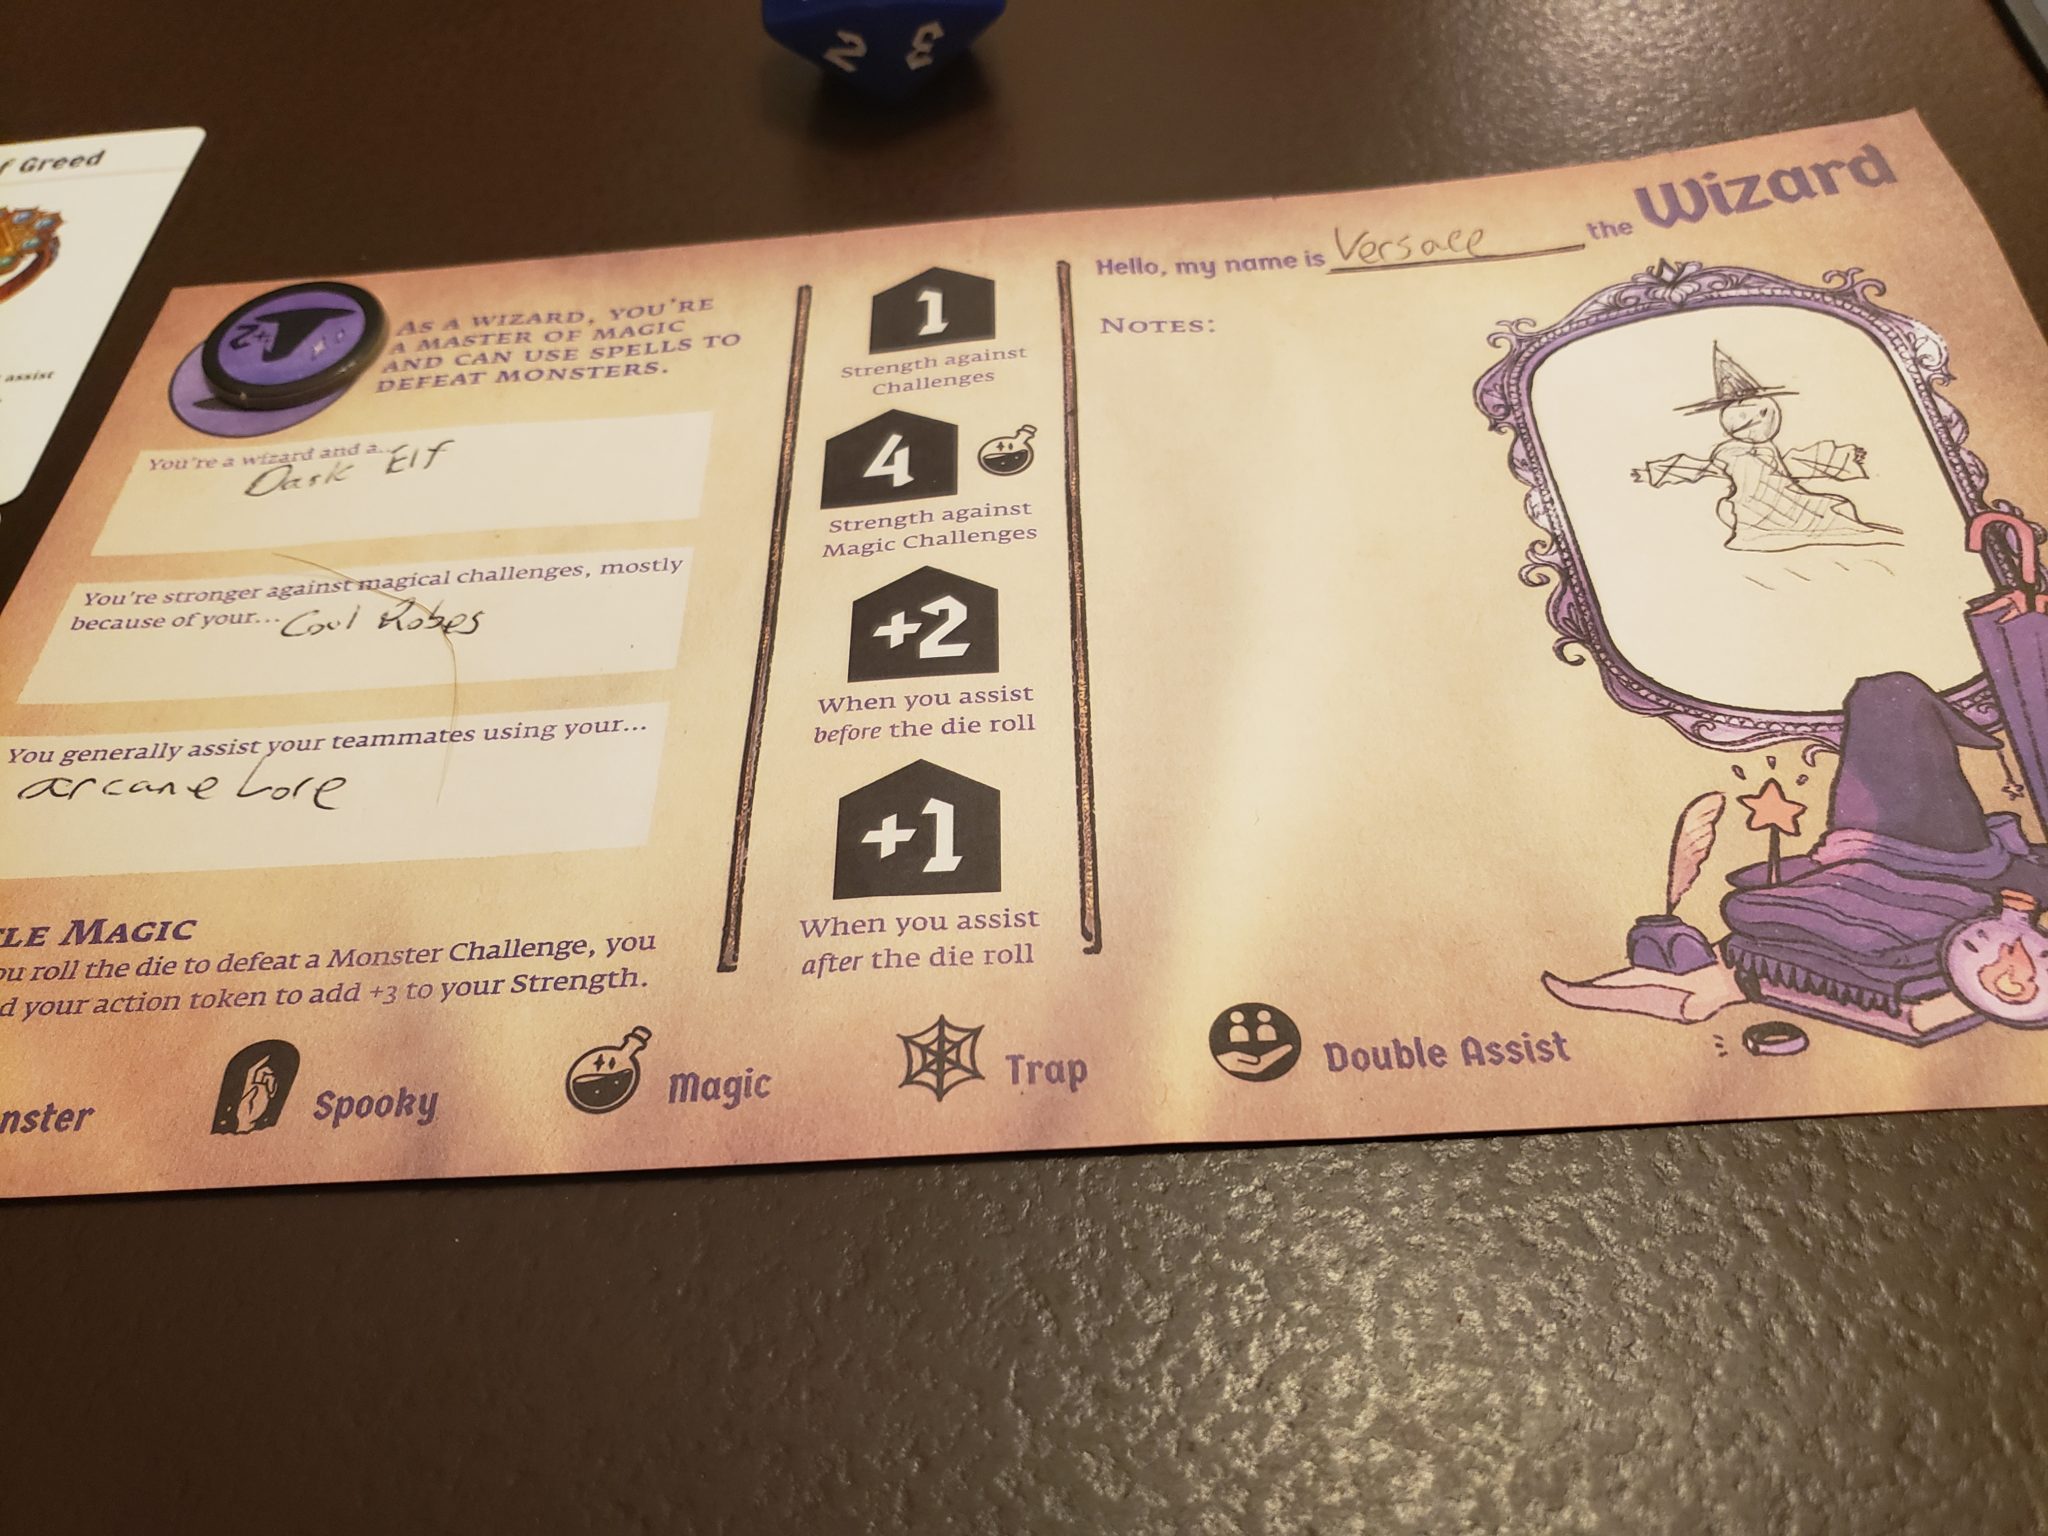 The character sheet